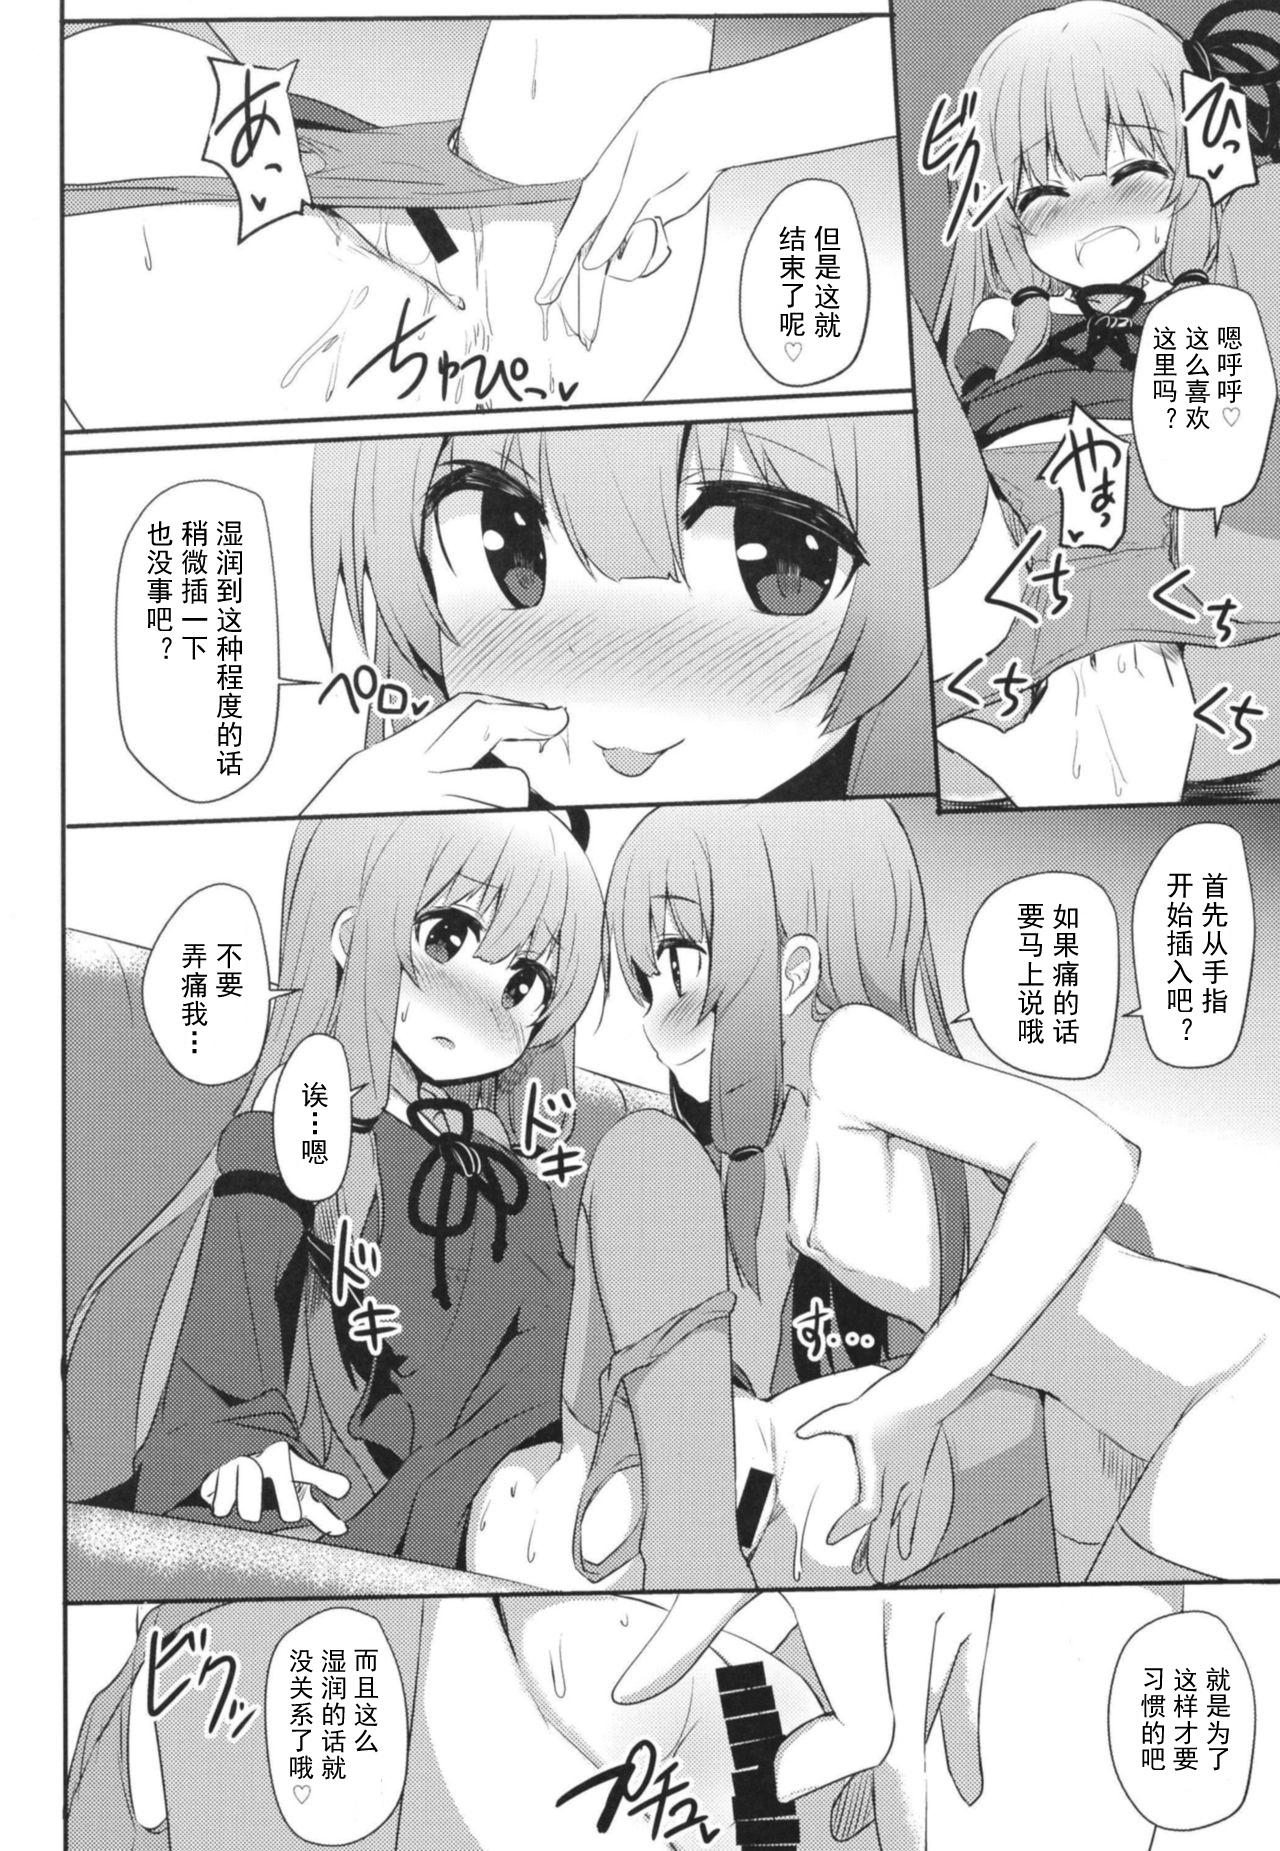 Interview [Milk Pudding (Jamcy)] Akane-chan Challenge! 4-kaime (VOICEROID) [Chinese] [古早个人汉化] [Digital] - Voiceroid Menage - Page 6